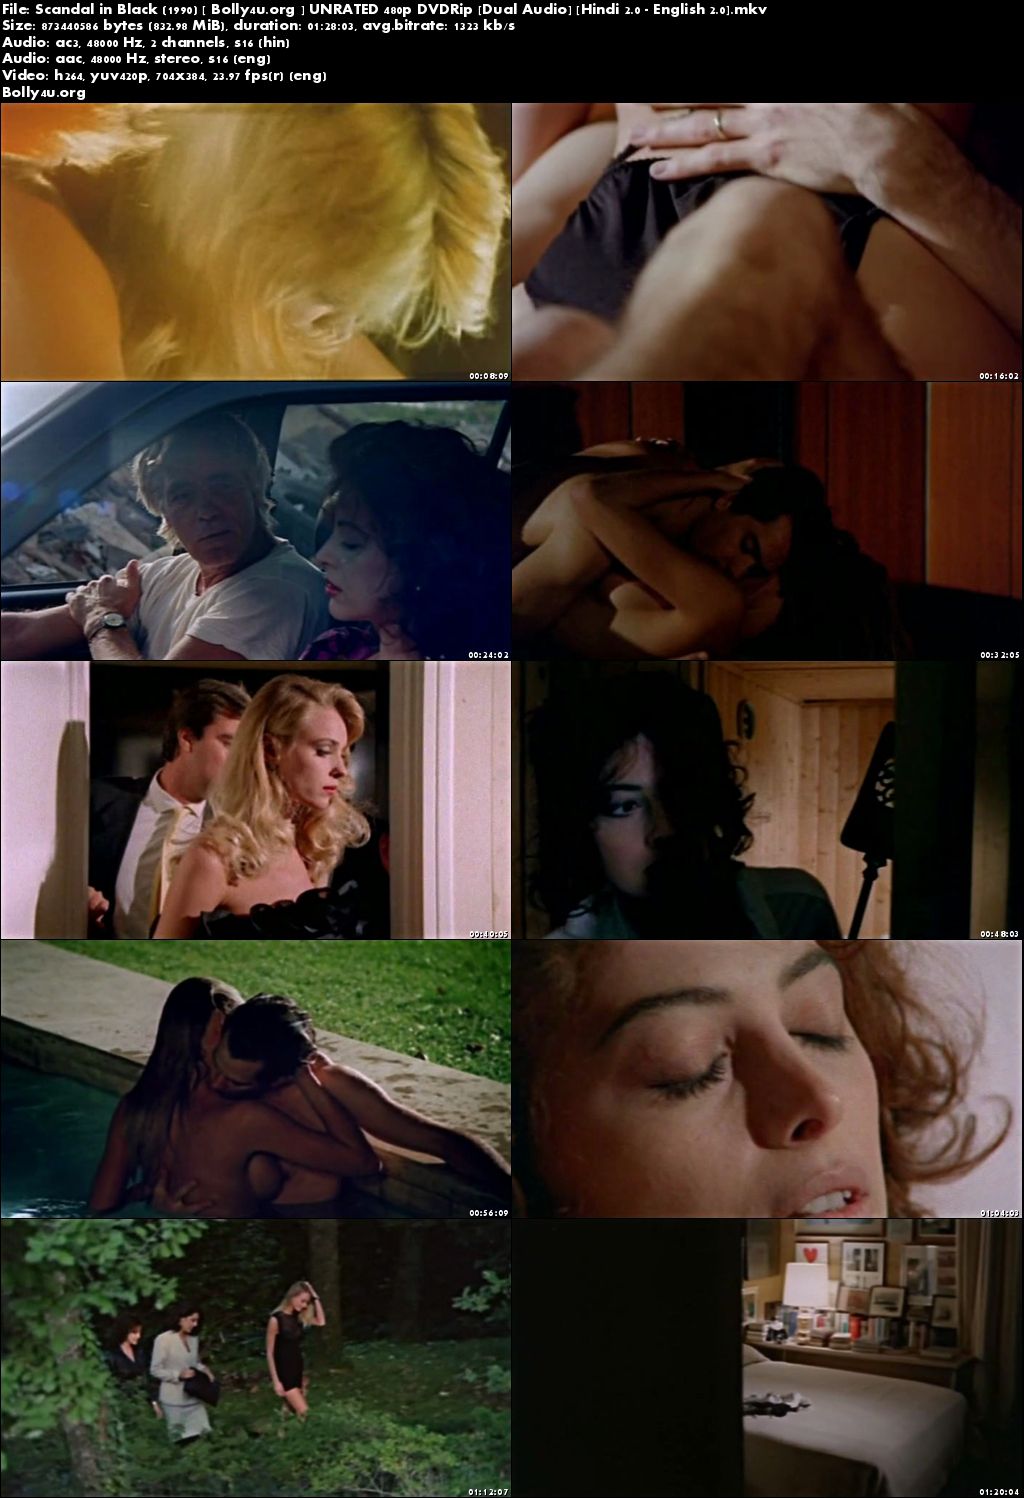 [18+] Scandal in Black 1990 DVDRip 800MB Hindi UNRATED Dual Audio Download